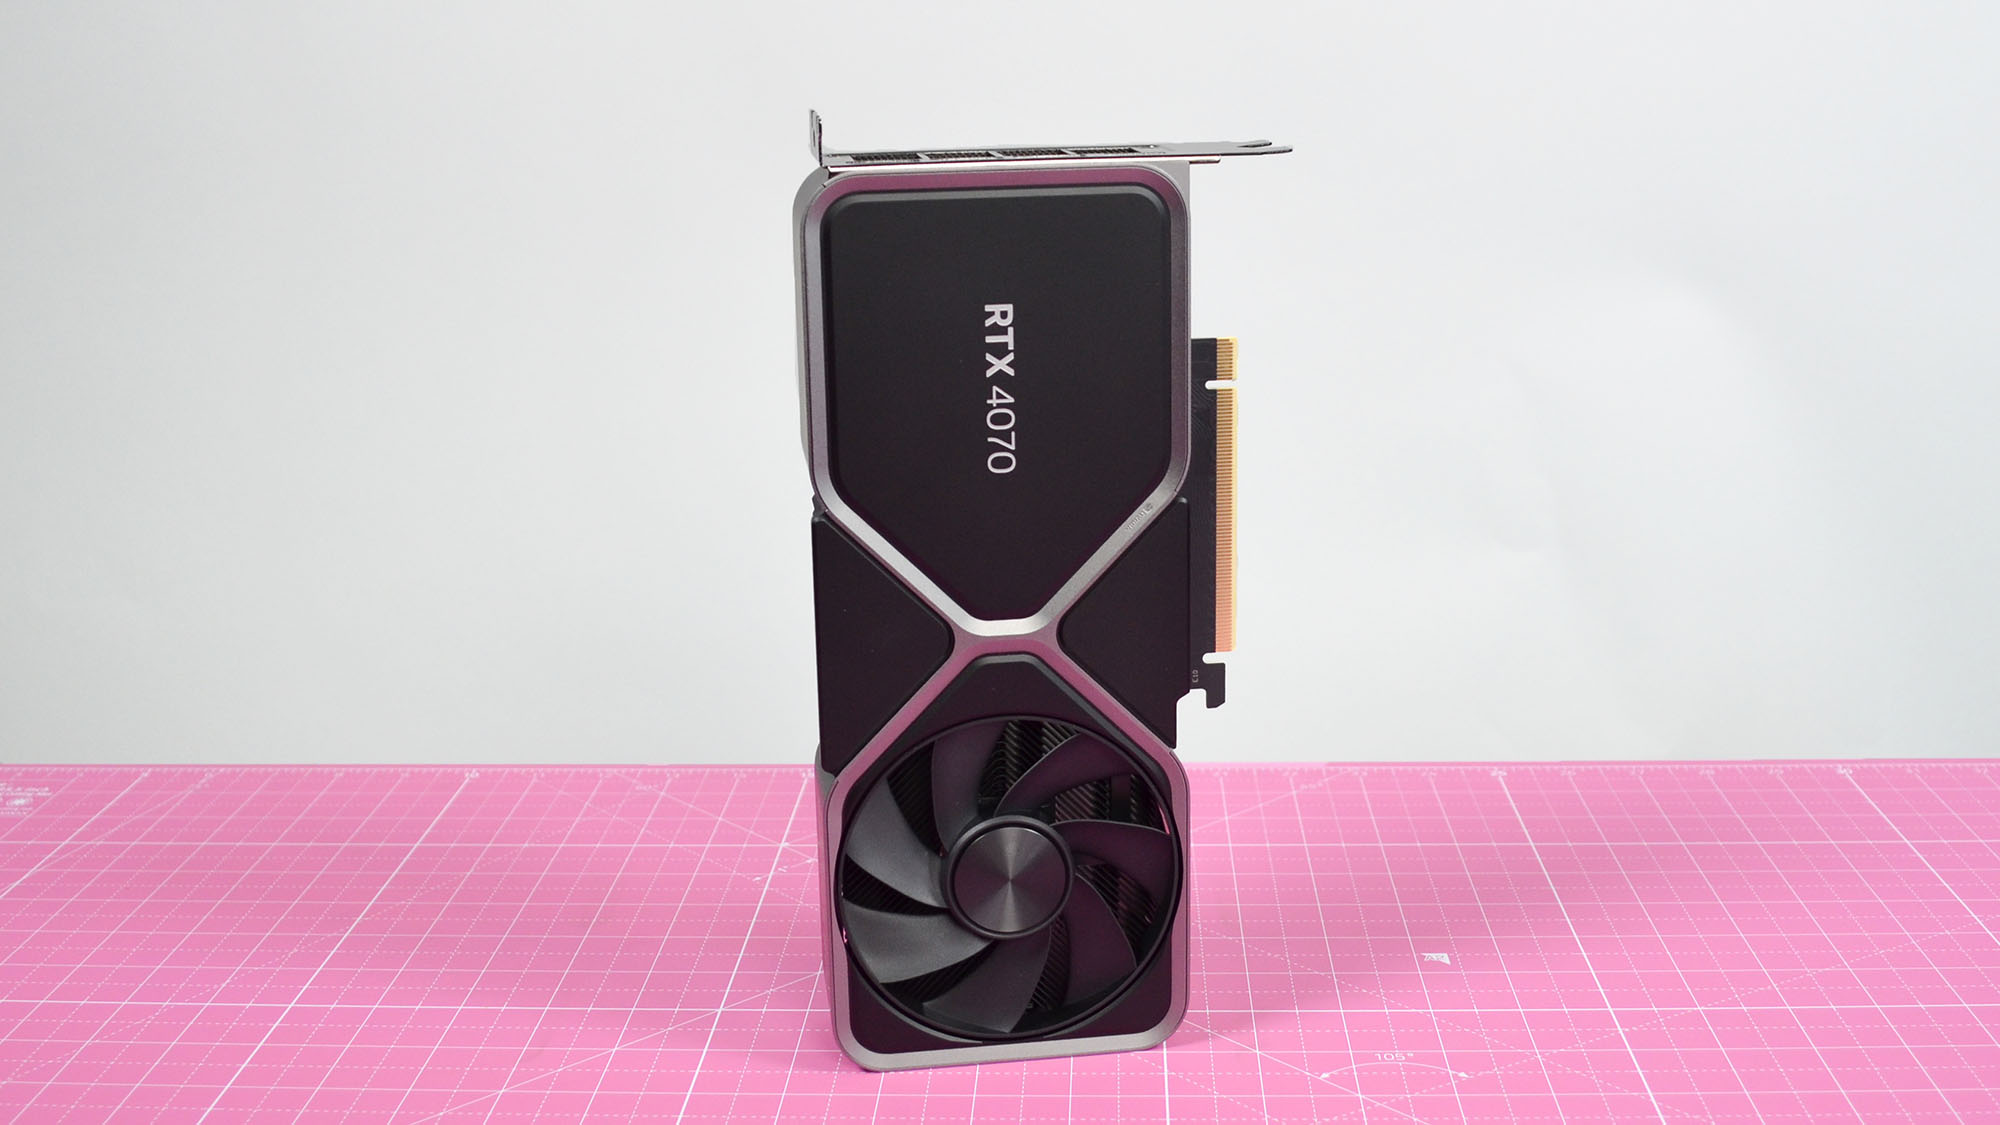 An Nvidia GeForce RTX 4070 graphics card standing upright on a pink desk mat